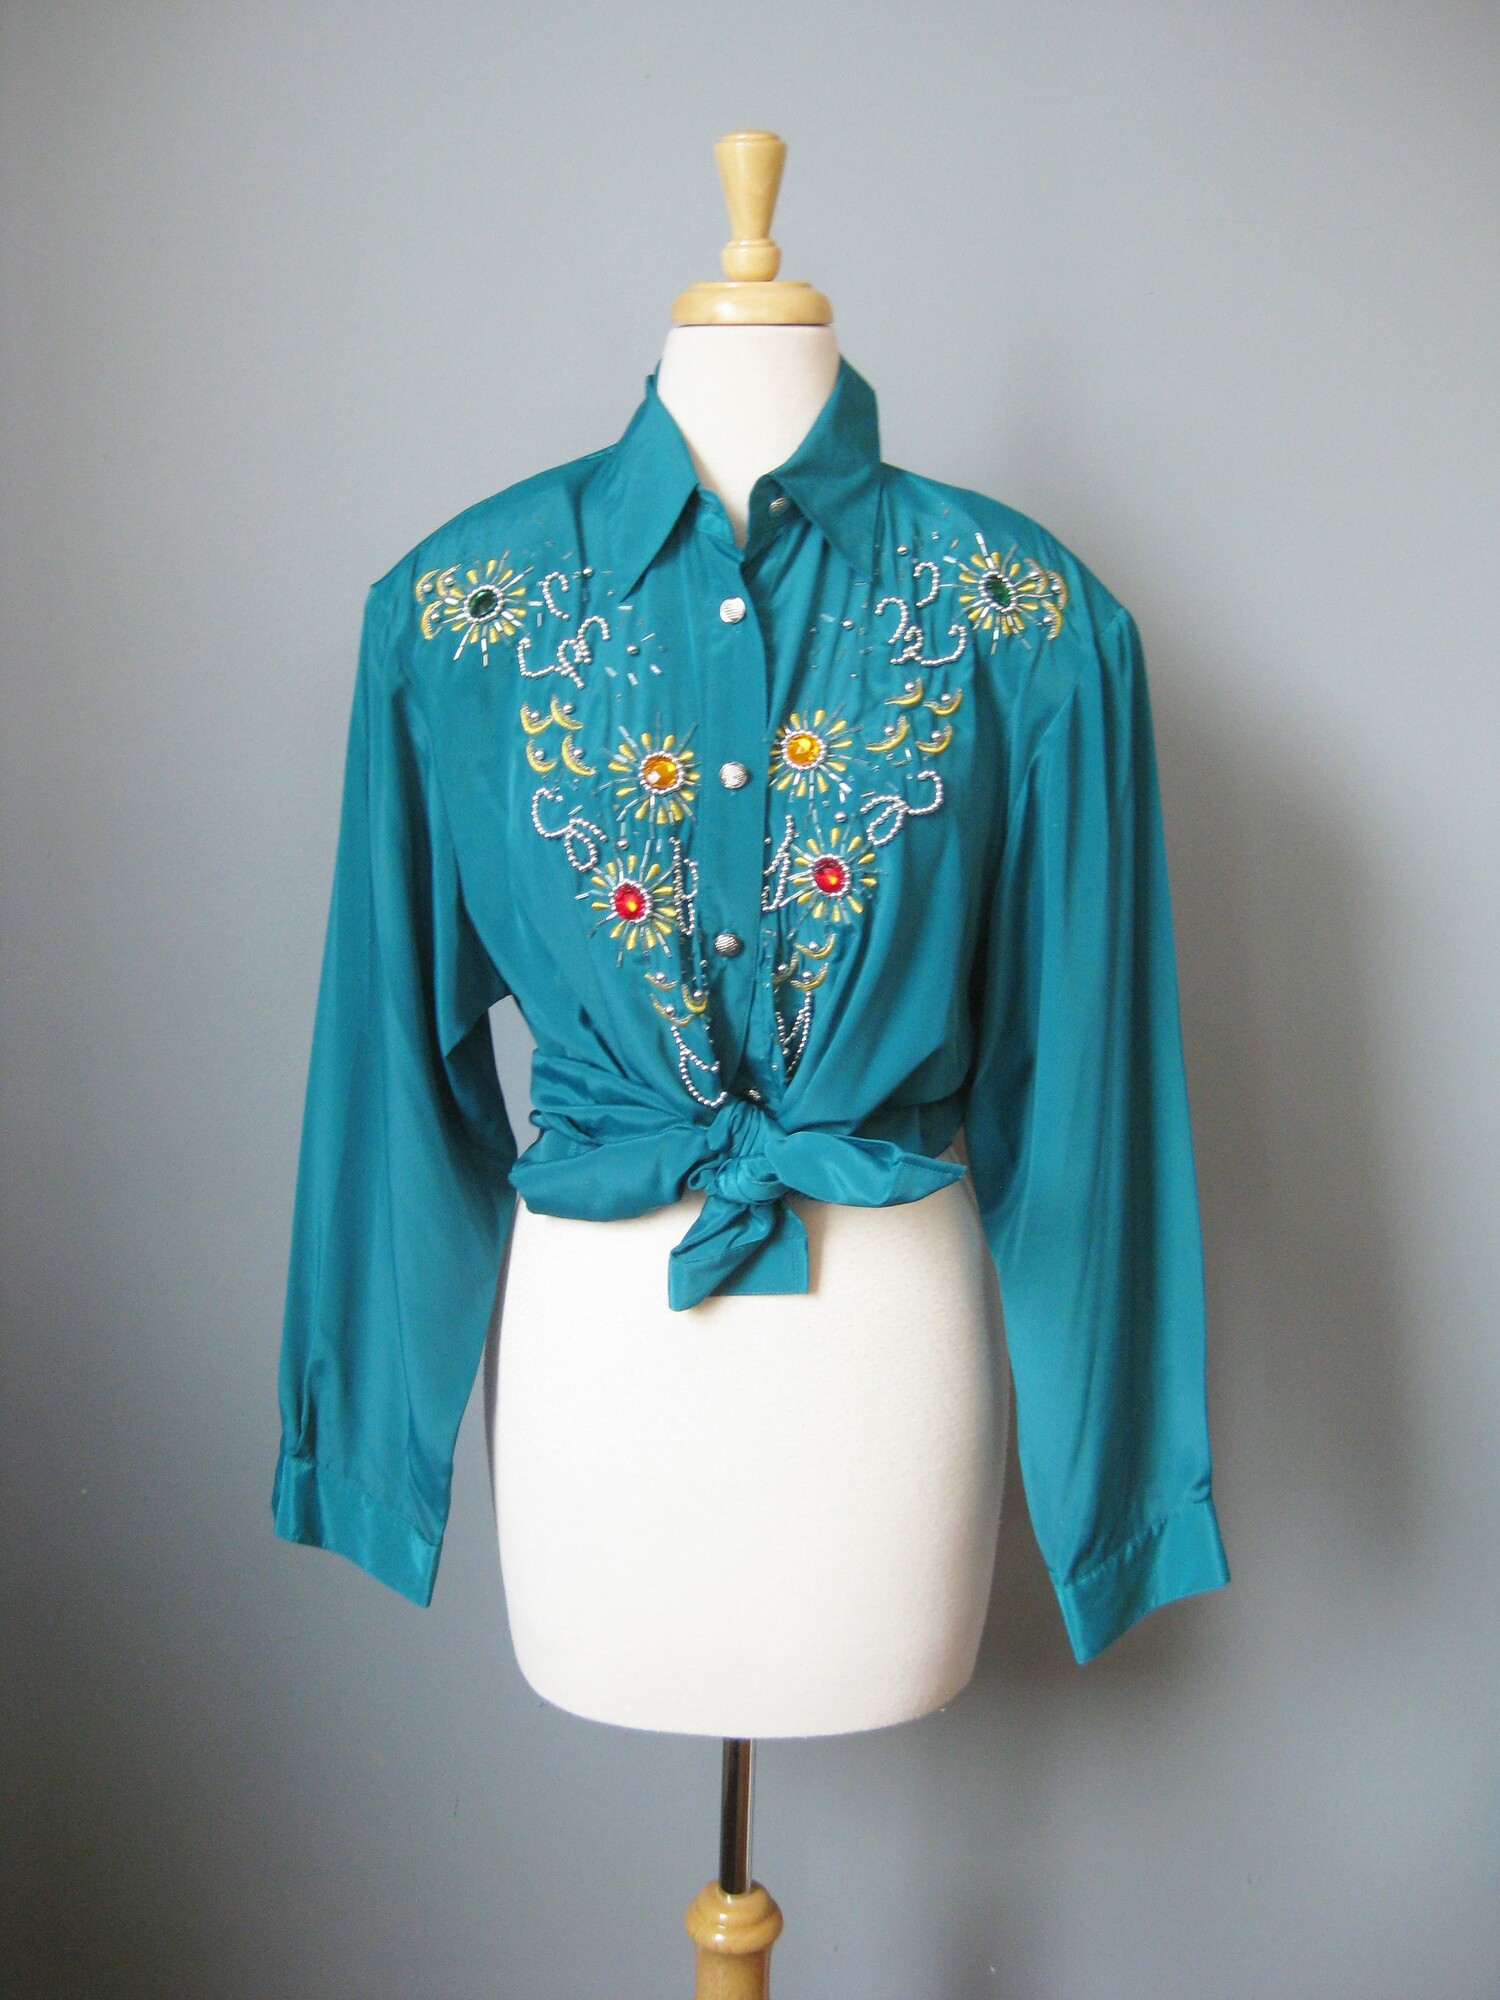 This long sleeved teal green shirt is lavishly bejeweled with large jewel tone stones  and gold beaded embroidery.

This piece was made in Hong Kong by Harbour Vue.   It's made of a slick matte polyester. The jewels are multi color plastic.  Good quality fabric in excellent condition.  Shoulder pads.

It is marked size 16, which I believe is pretty true to size today, but definitely use the measurements provided as your ultimate guide to fit.

These  are the flat measurements, please double where appropriate:
Shoulder to shoulder : 18
Armpit to Armpit: 21
Width at hem: 23
Underarm sleeve seam: 22
Length: 29 1/2

Thank you for looking.
#43094